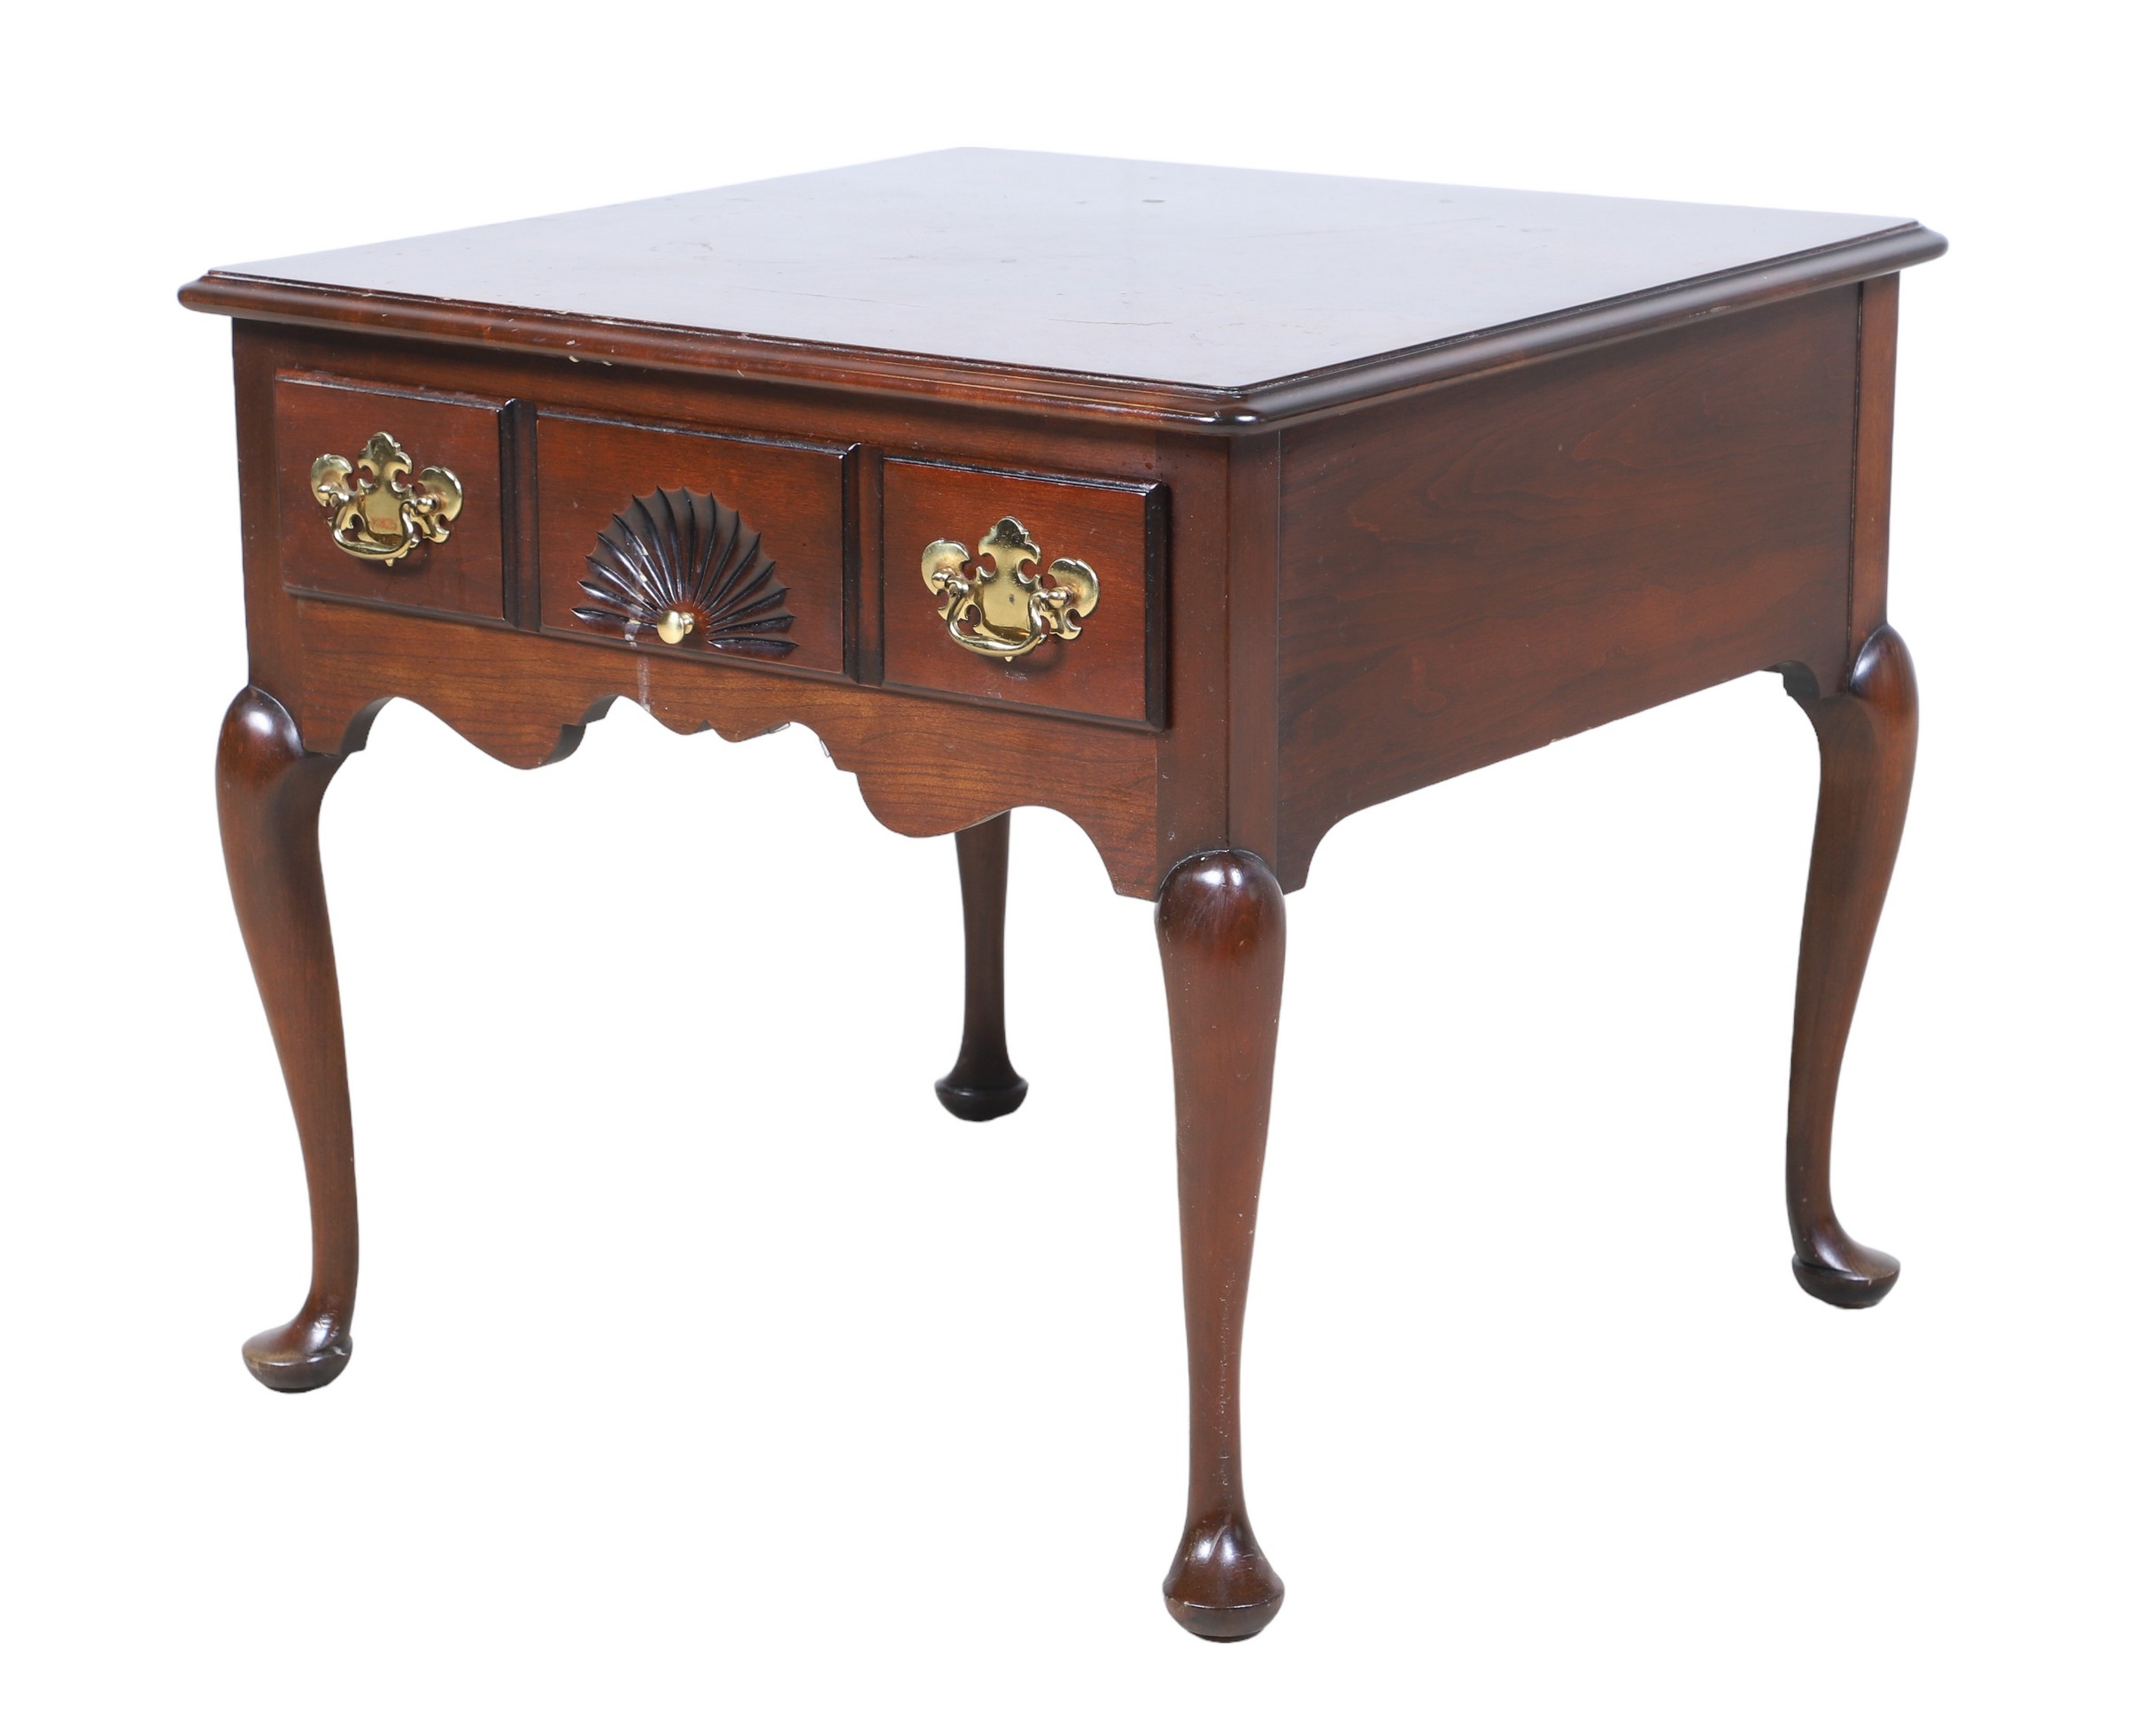 Statton Queen Anne style mahogany